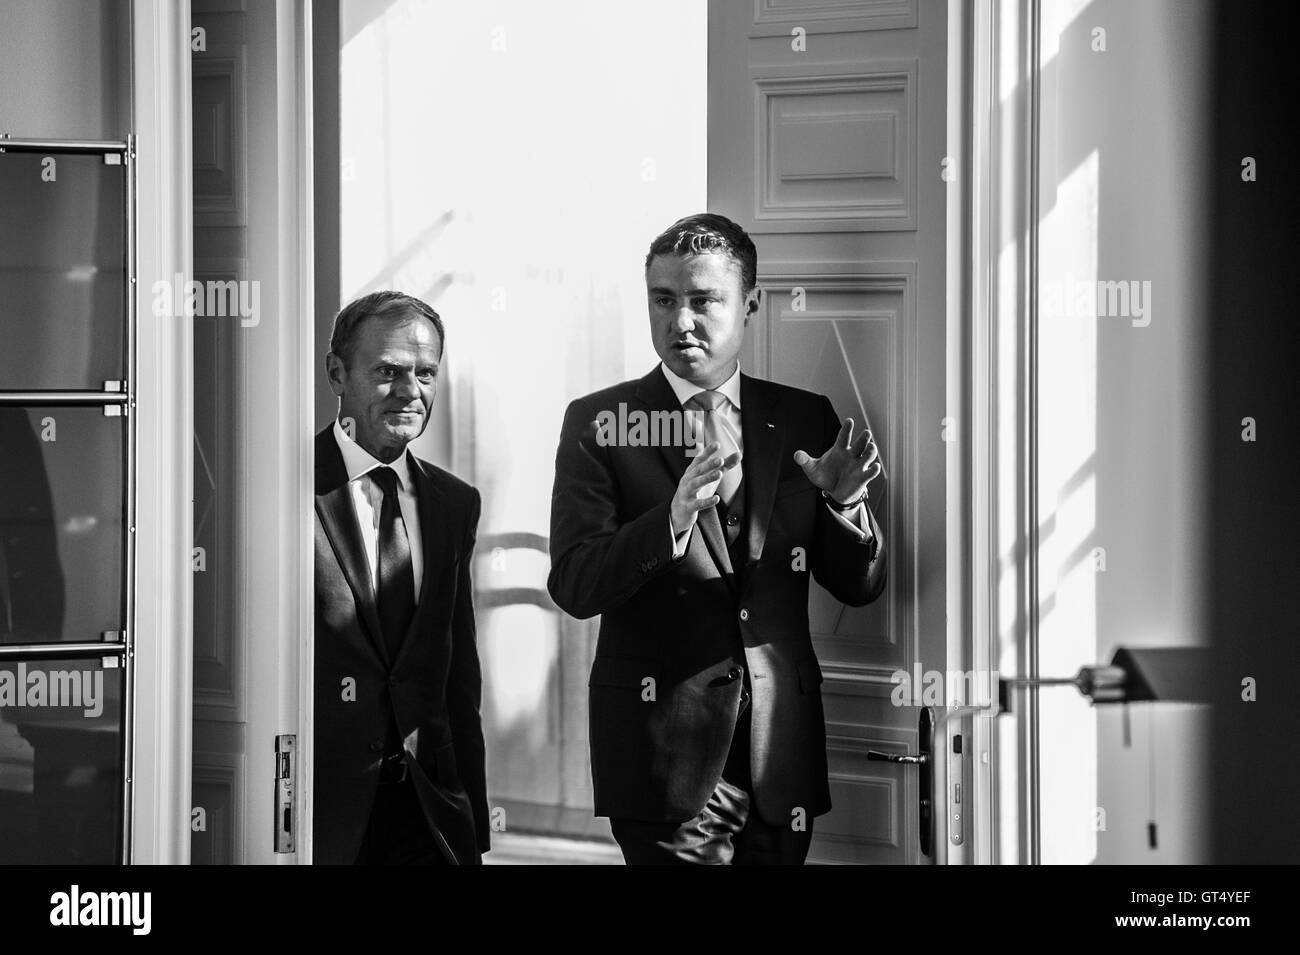 Tallinn, Estonia, 9th September 2016. Estonian Prime Minister Taavi Roivas (R) and President of the European Council Donald Tusk (L) arrive to a press conference after their meeting at Steenbok House. The main topics of their meeting will be the future of the European Union after the Brexit   as well as the Estonian politic situation regarding the Presidential election.  Estonia will host the the Presidency of the Council of the European Union in the second half of 2017, this for the first time. Credit:  Nicolas Bouvy/Alamy Live News Stock Photo